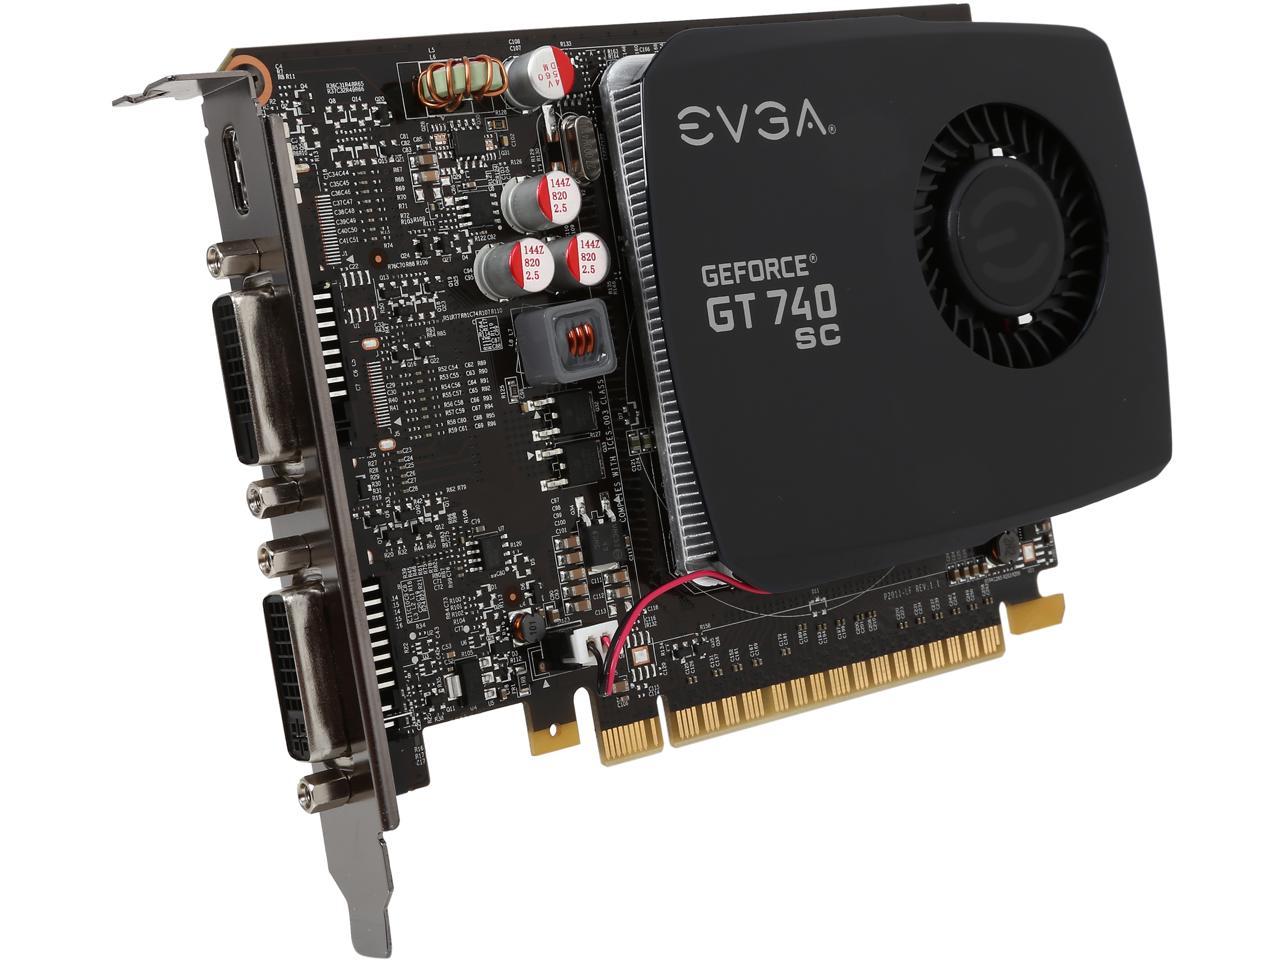 EVGA GeForce GT 740 Superclocked Dual Slot 2GB DDR3 Graphics Cards  02G-P4-2743-KR